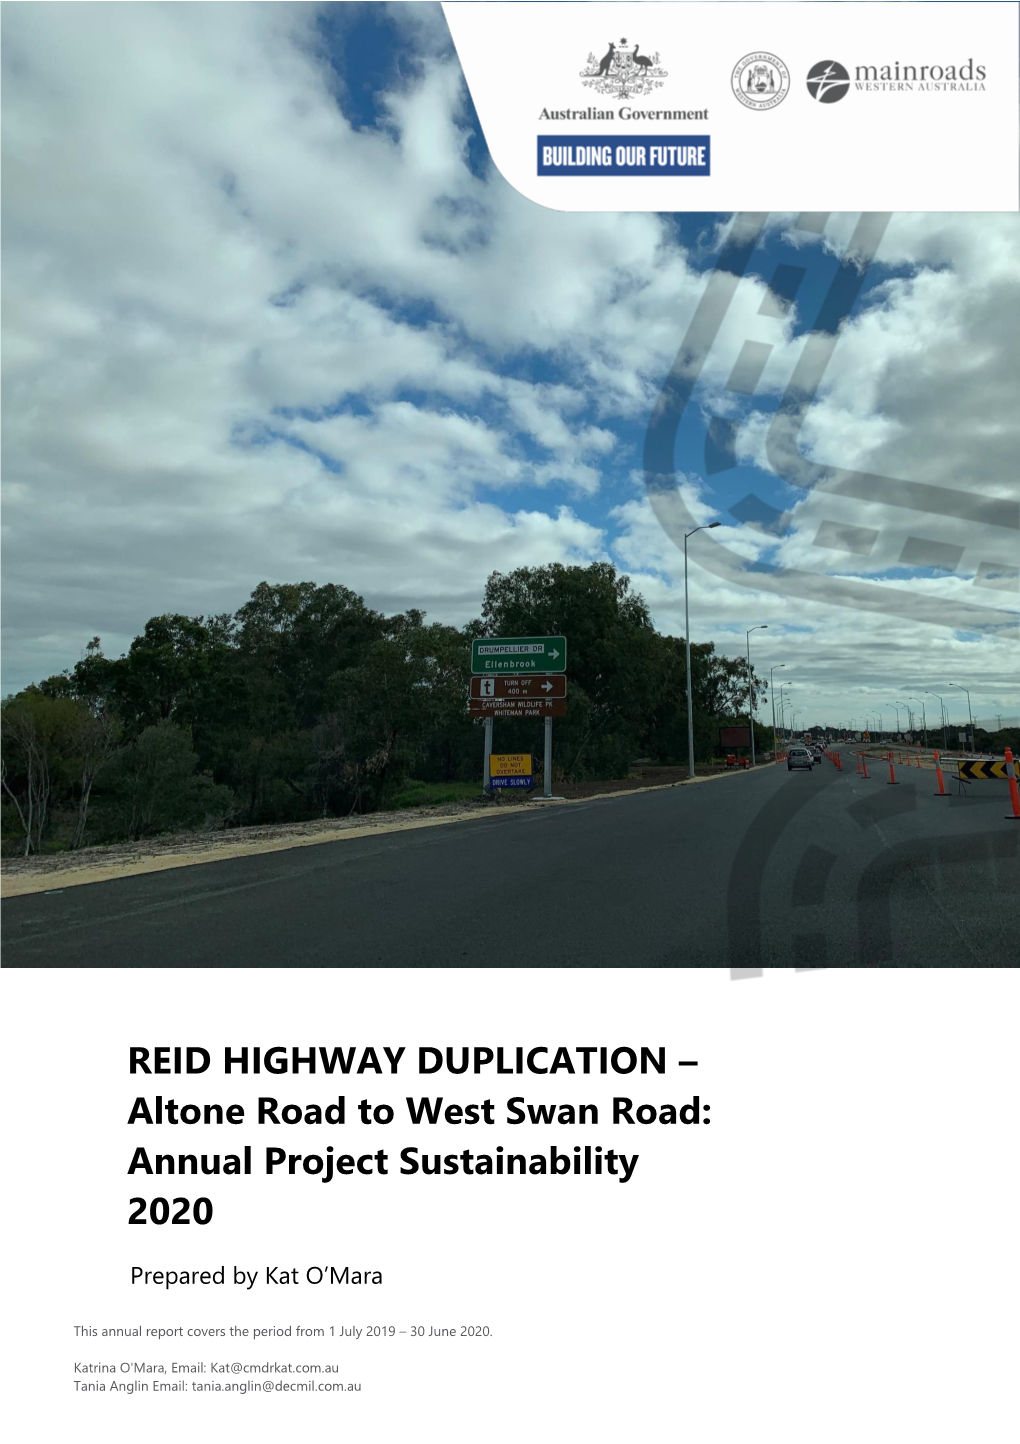 REID HIGHWAY DUPLICATION – Altone Road to West Swan Road: Annual Project Sustainability 2020